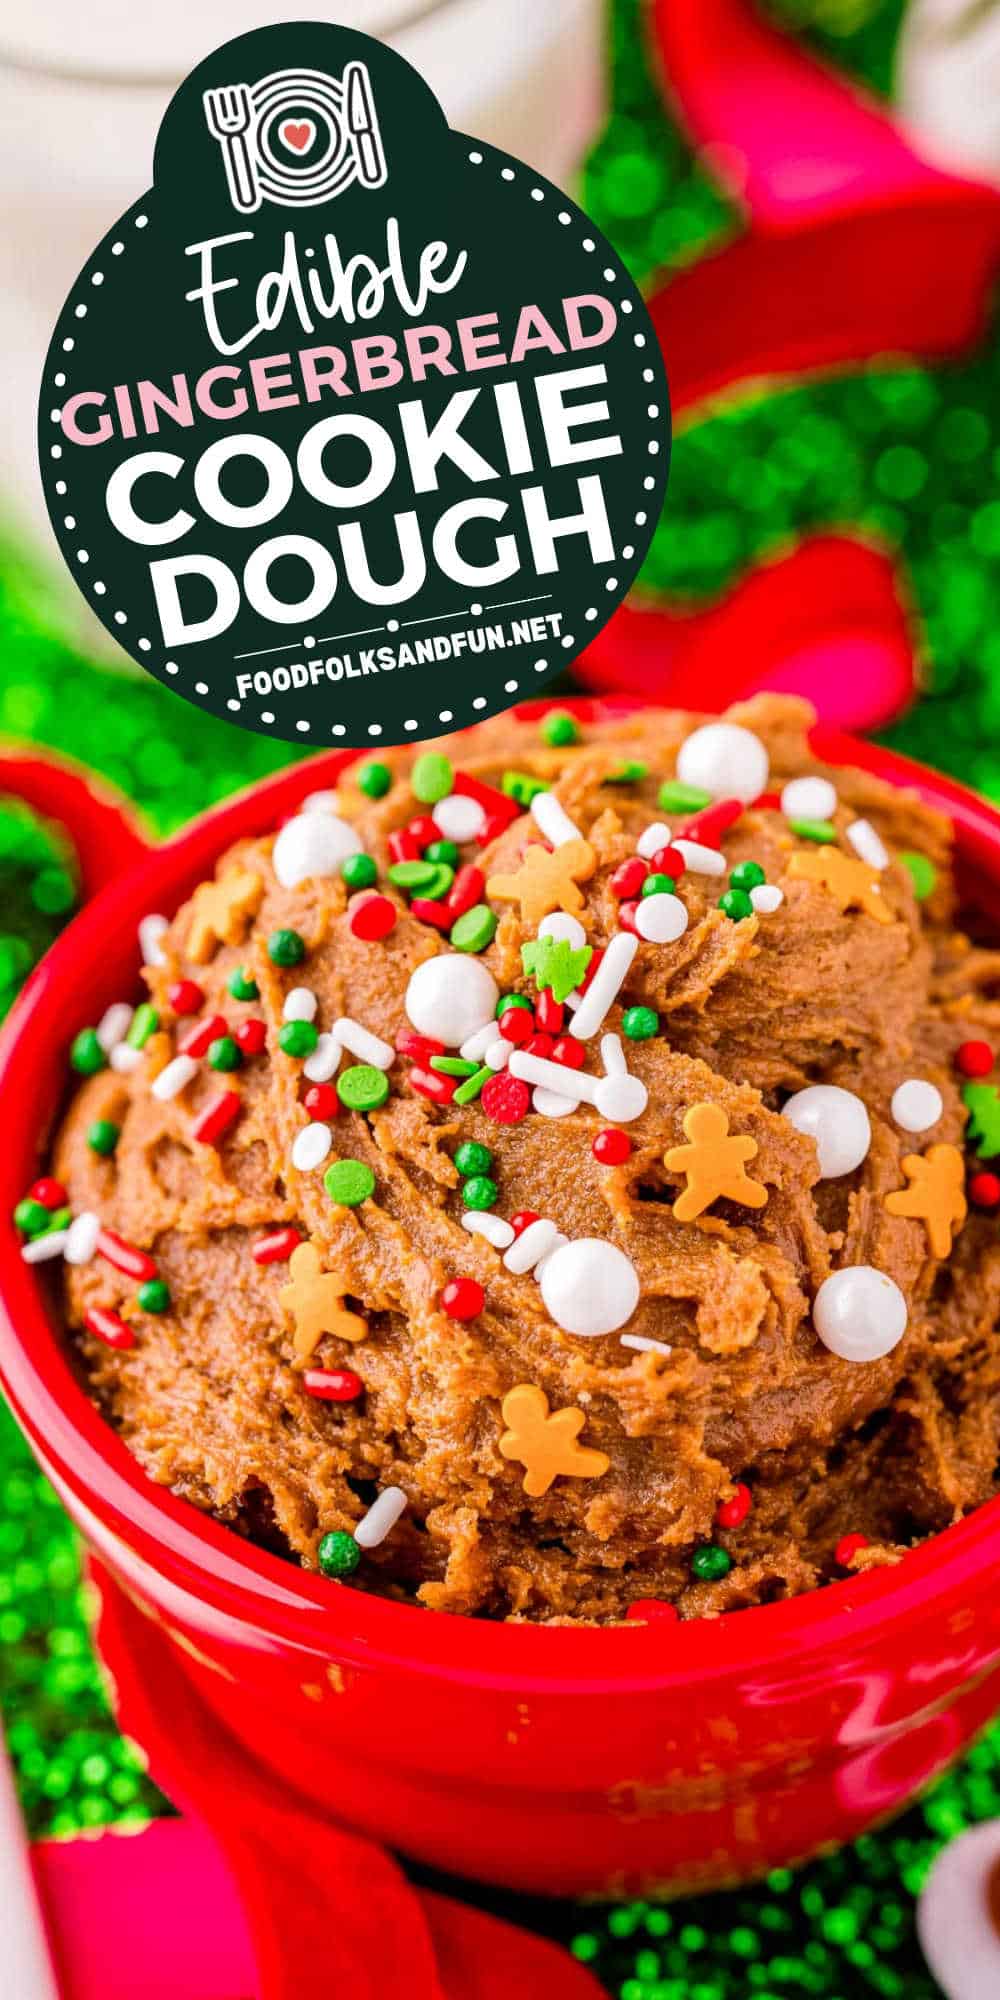 Edible Gingerbread Cookie Dough is an easy festive treat that's perfectly spiced and packs that molasses punch we all love. The best part is that it takes only minutes to prepare.  via @foodfolksandfun